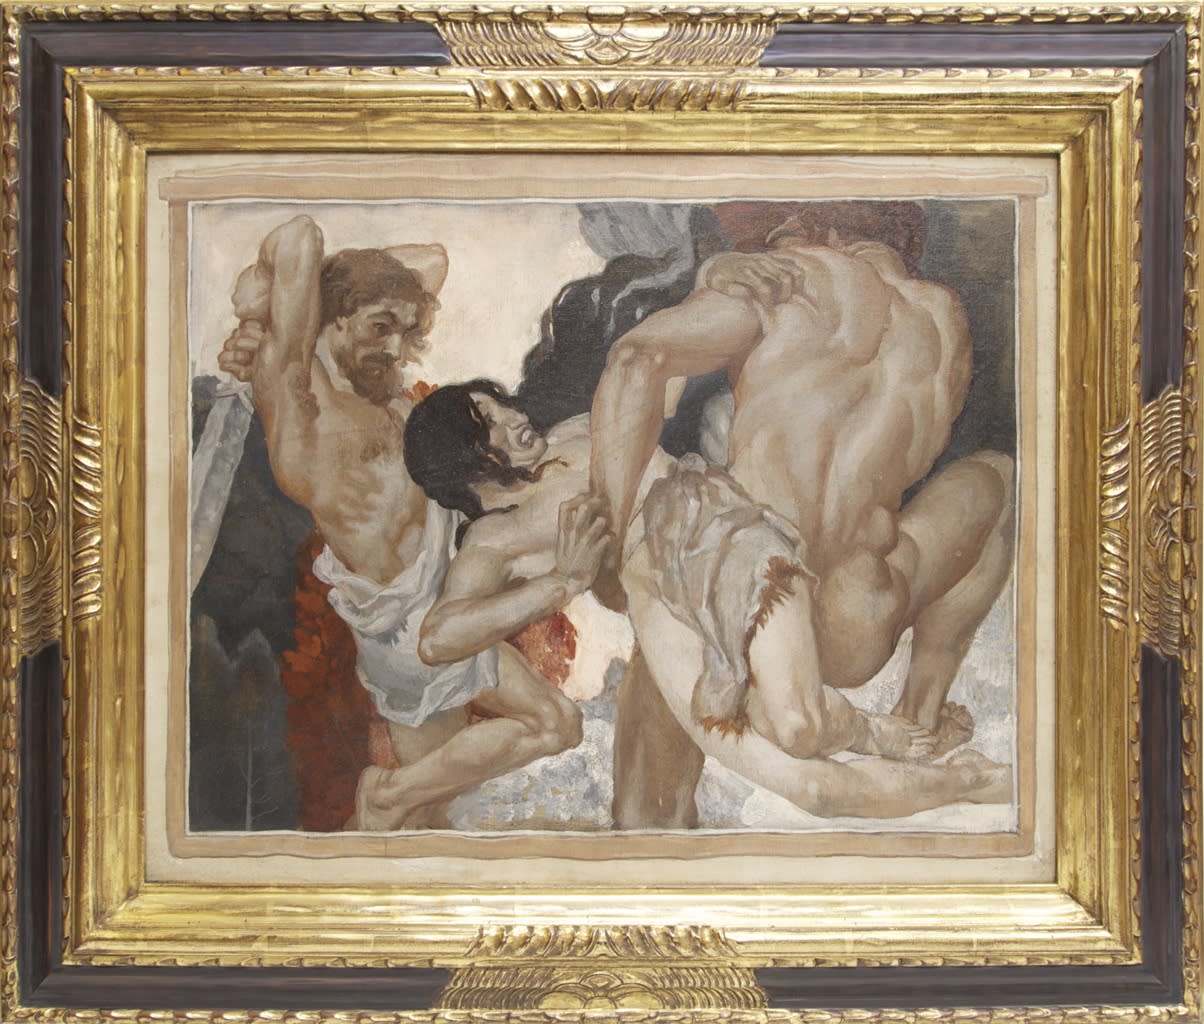 Abduction of Helen of Troy by Paris